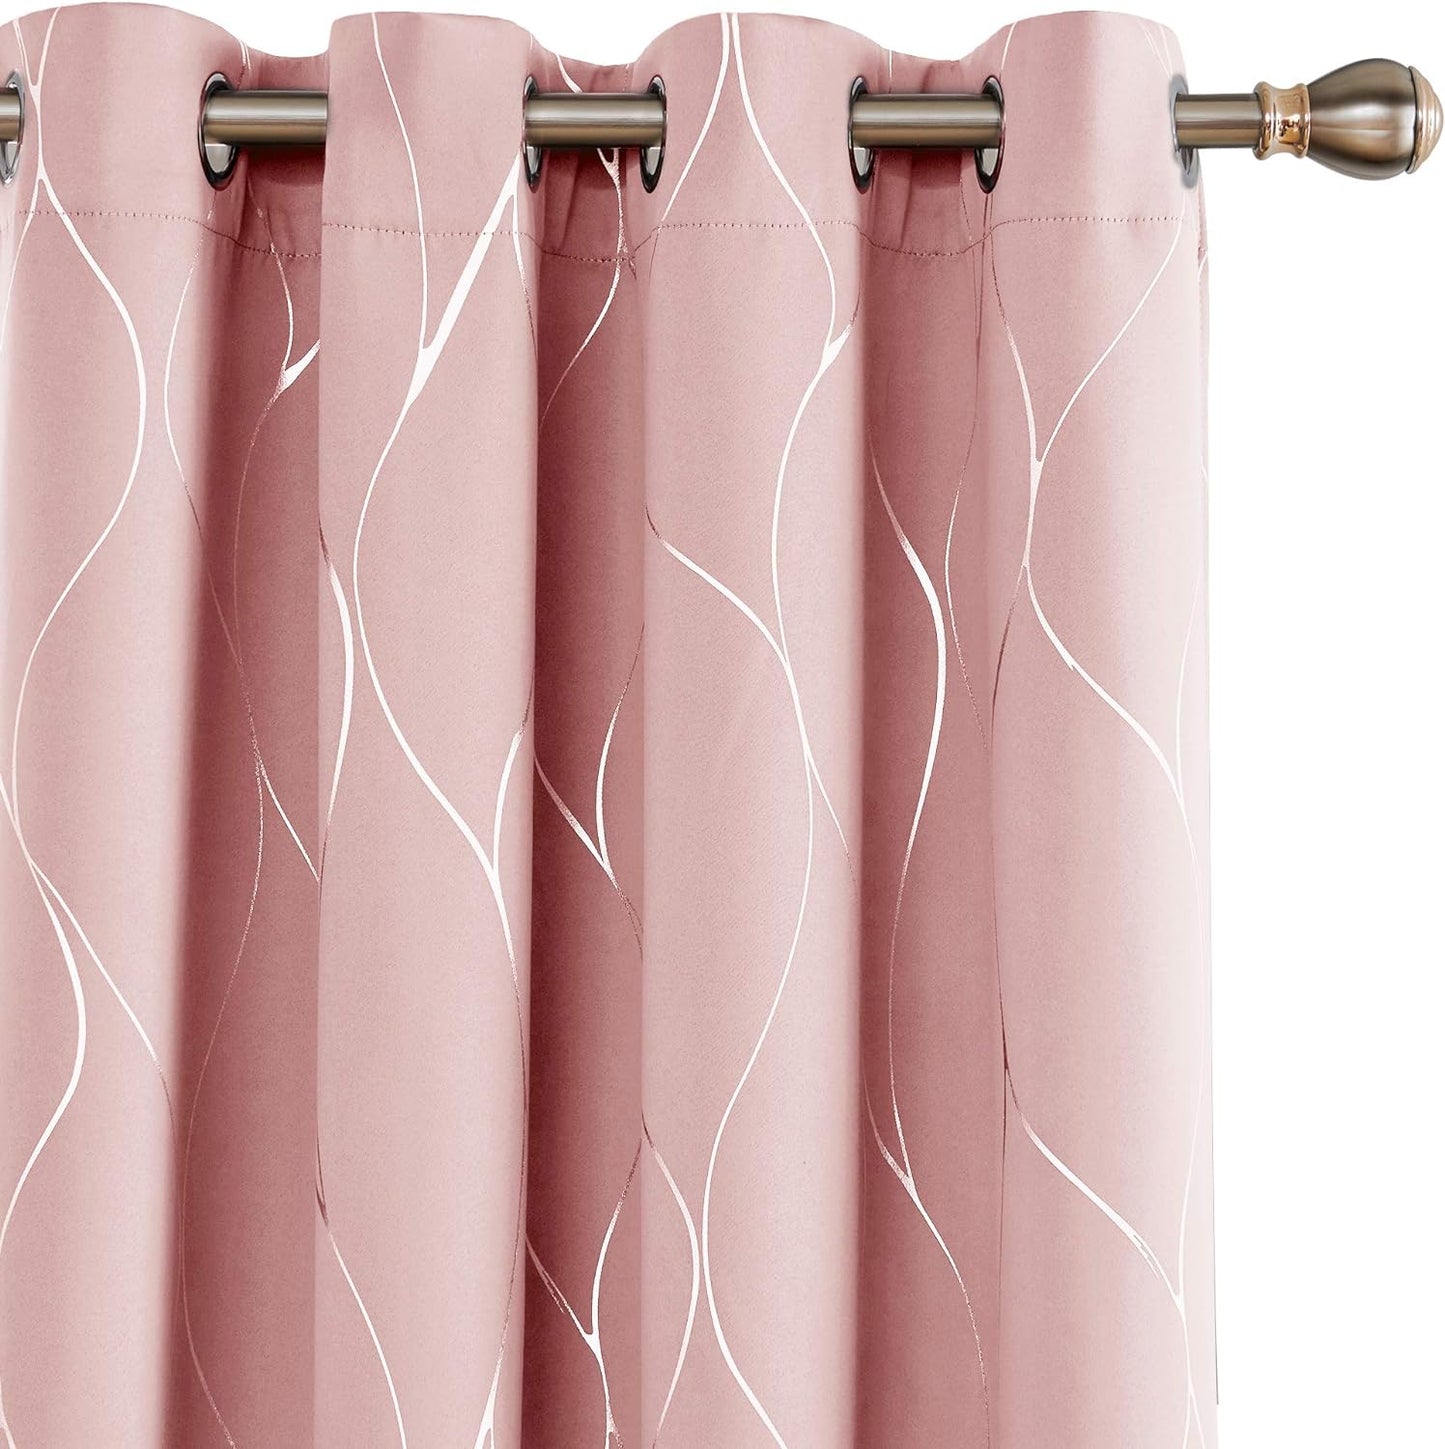 Deconovo Blackout Curtains with Foil Wave Pattern, Grommet Curtain Room Darkening Window Panels, Thermal Insulated Curtain Drapes for Nursery Room (42W X 54L Inch, 2 Panels, Turquoise)  DECONOVO Coral Pink W52 X L72 